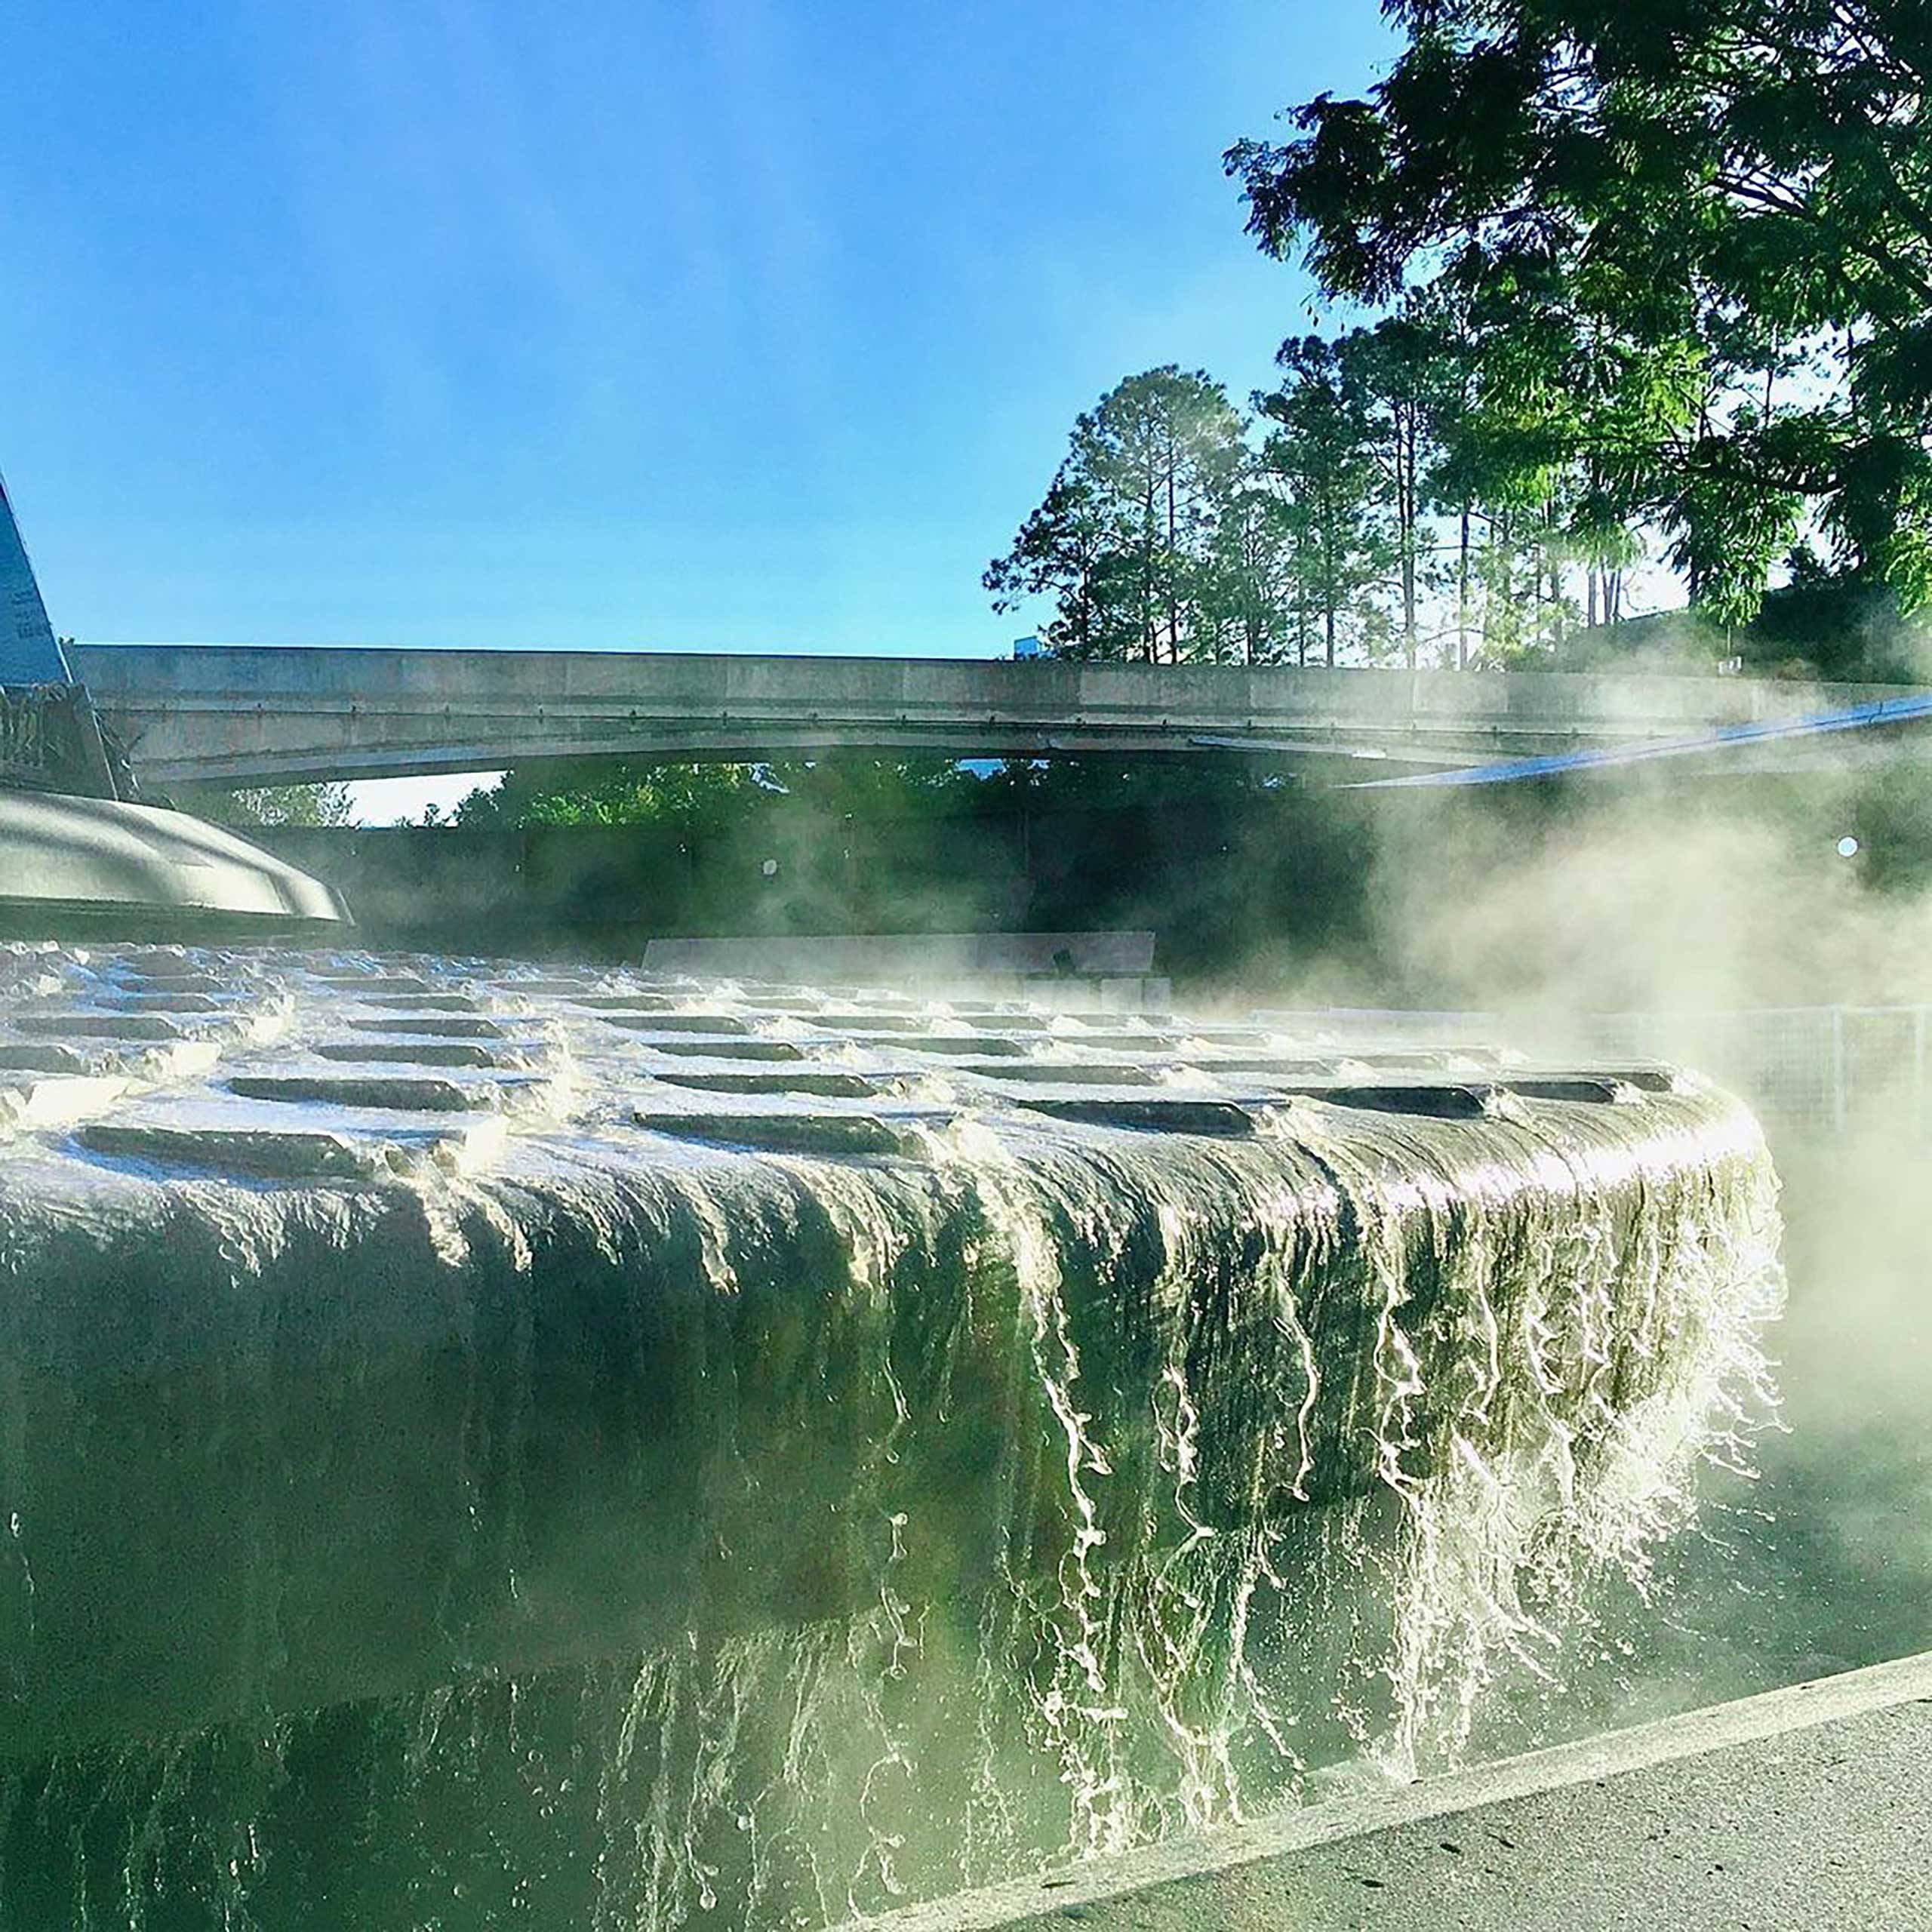 PHOTOS - Imagineer Zach Riddley shares some close-up details of the new EPCOT main entrance fountain